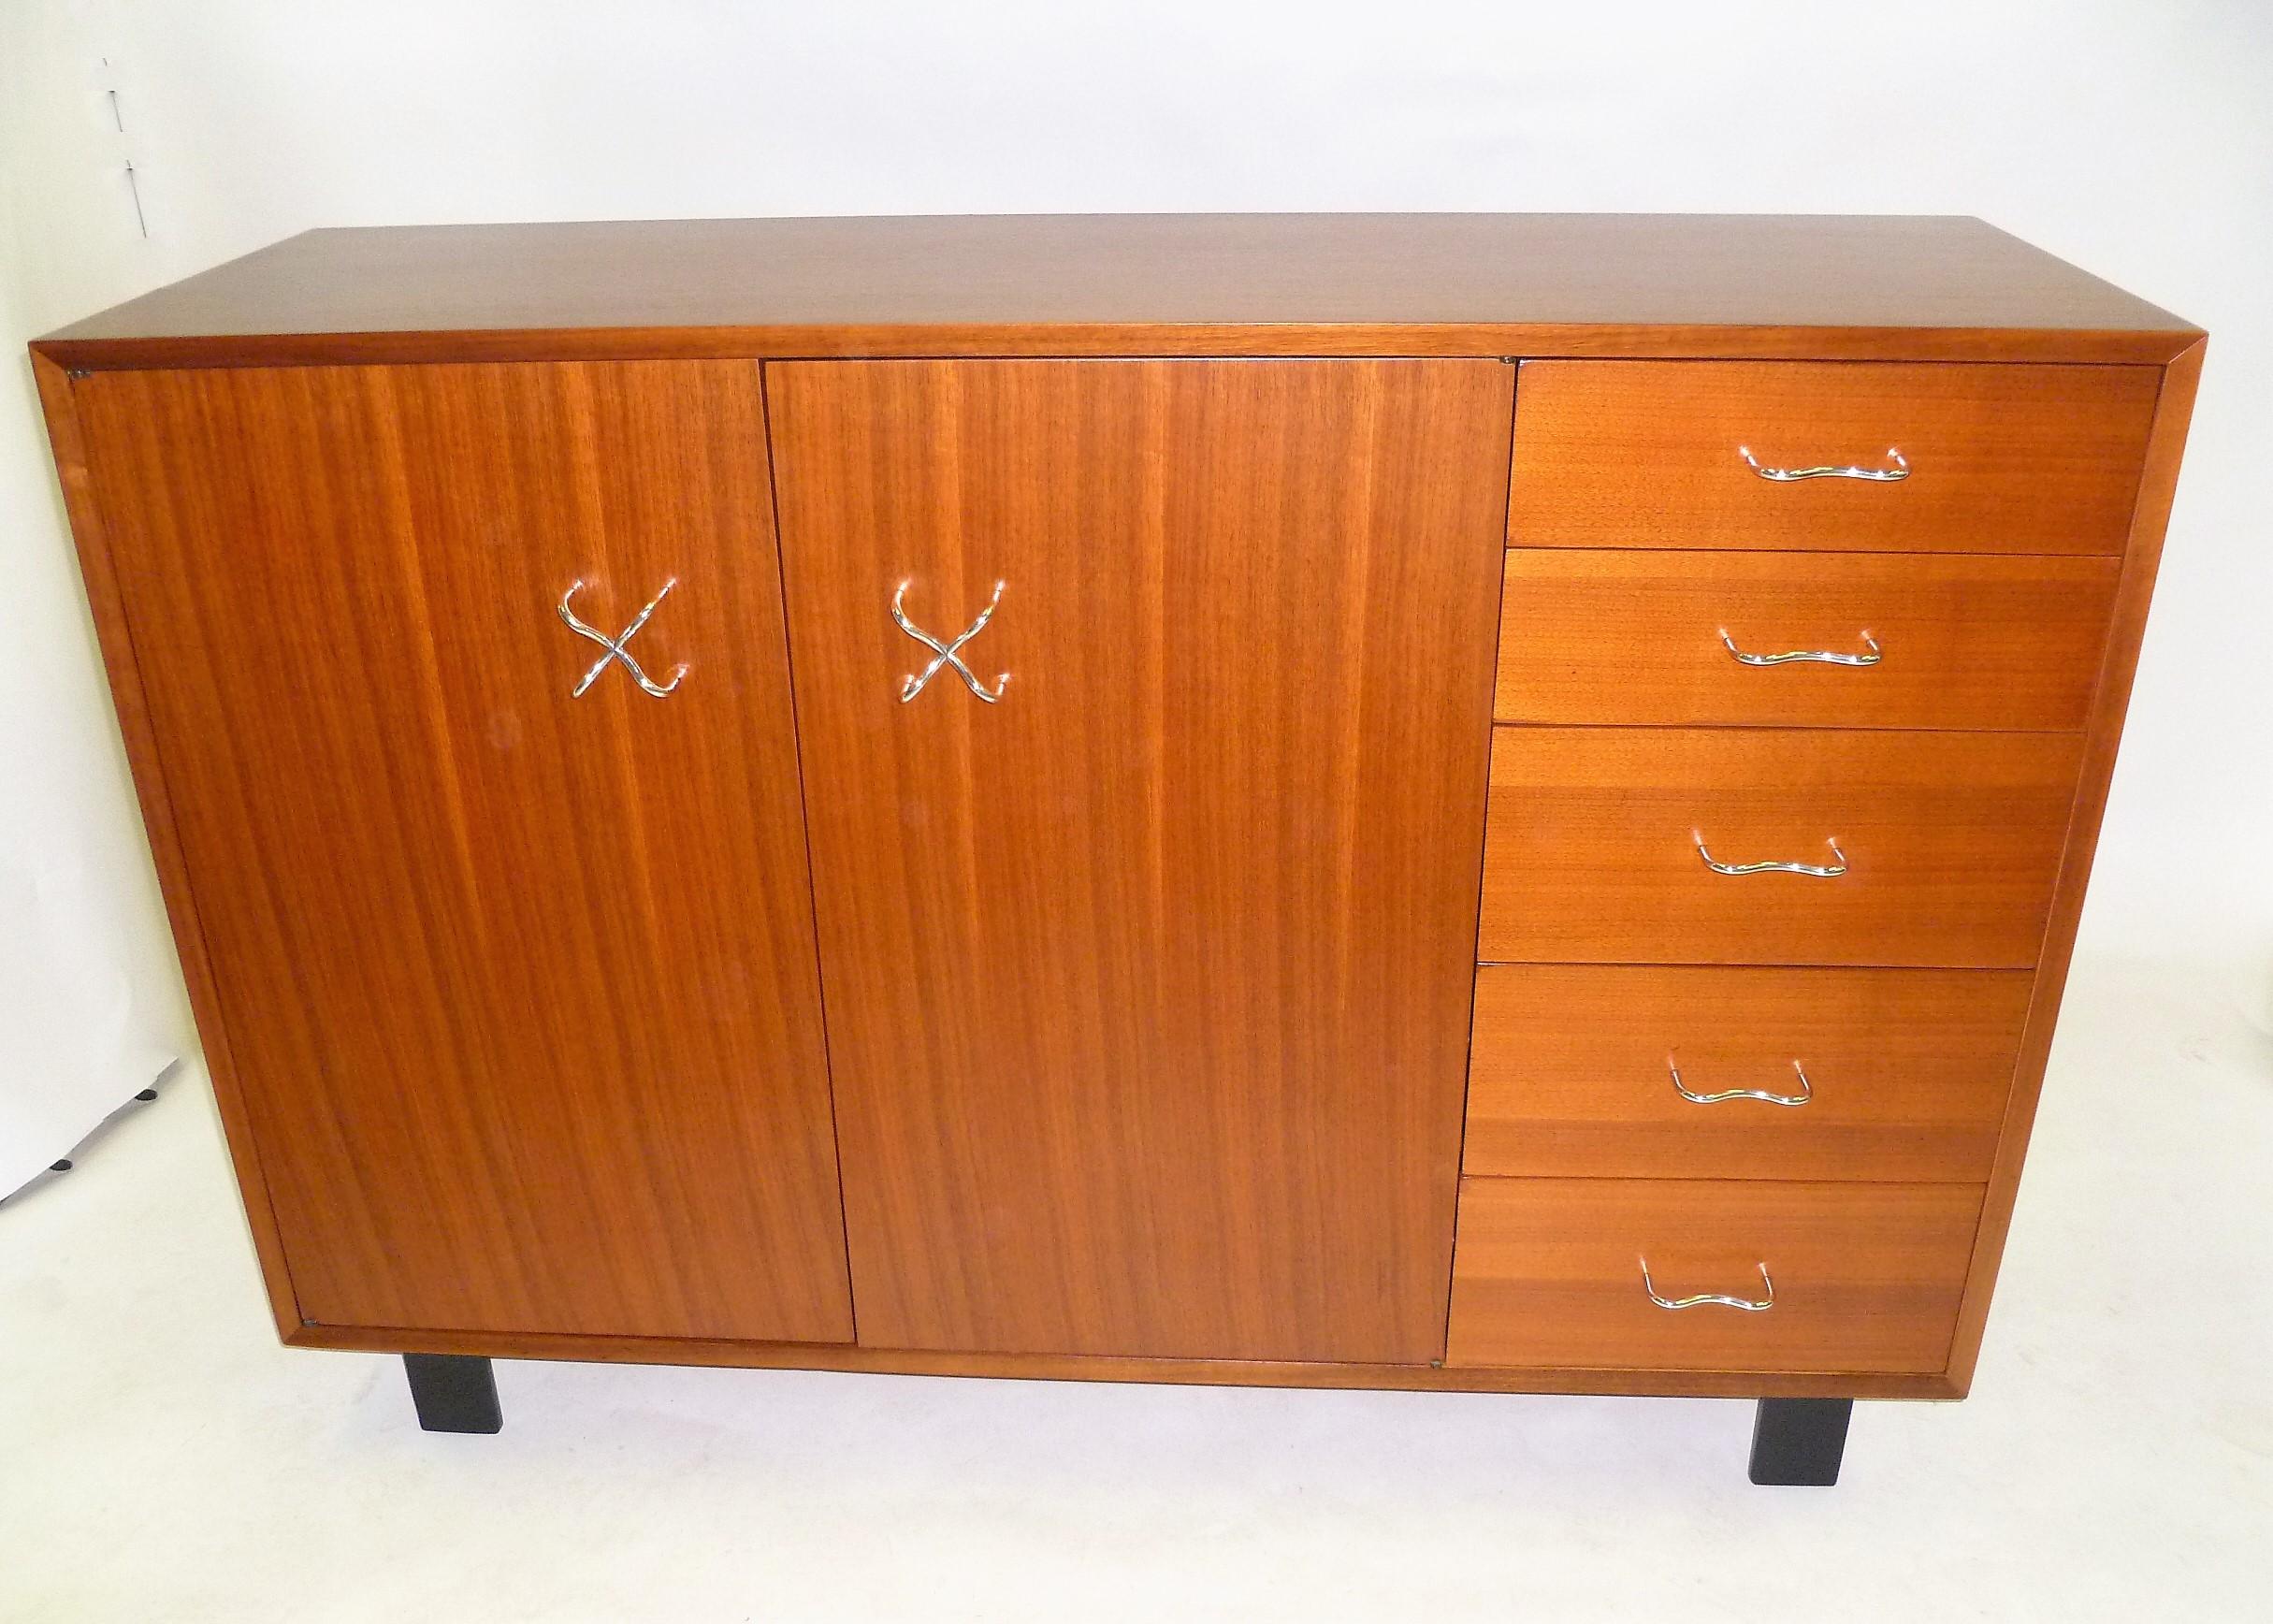 Mid-Century Modern 1950s George Nelson Credenza Buffet Sideboard for the Herman Miller Collection